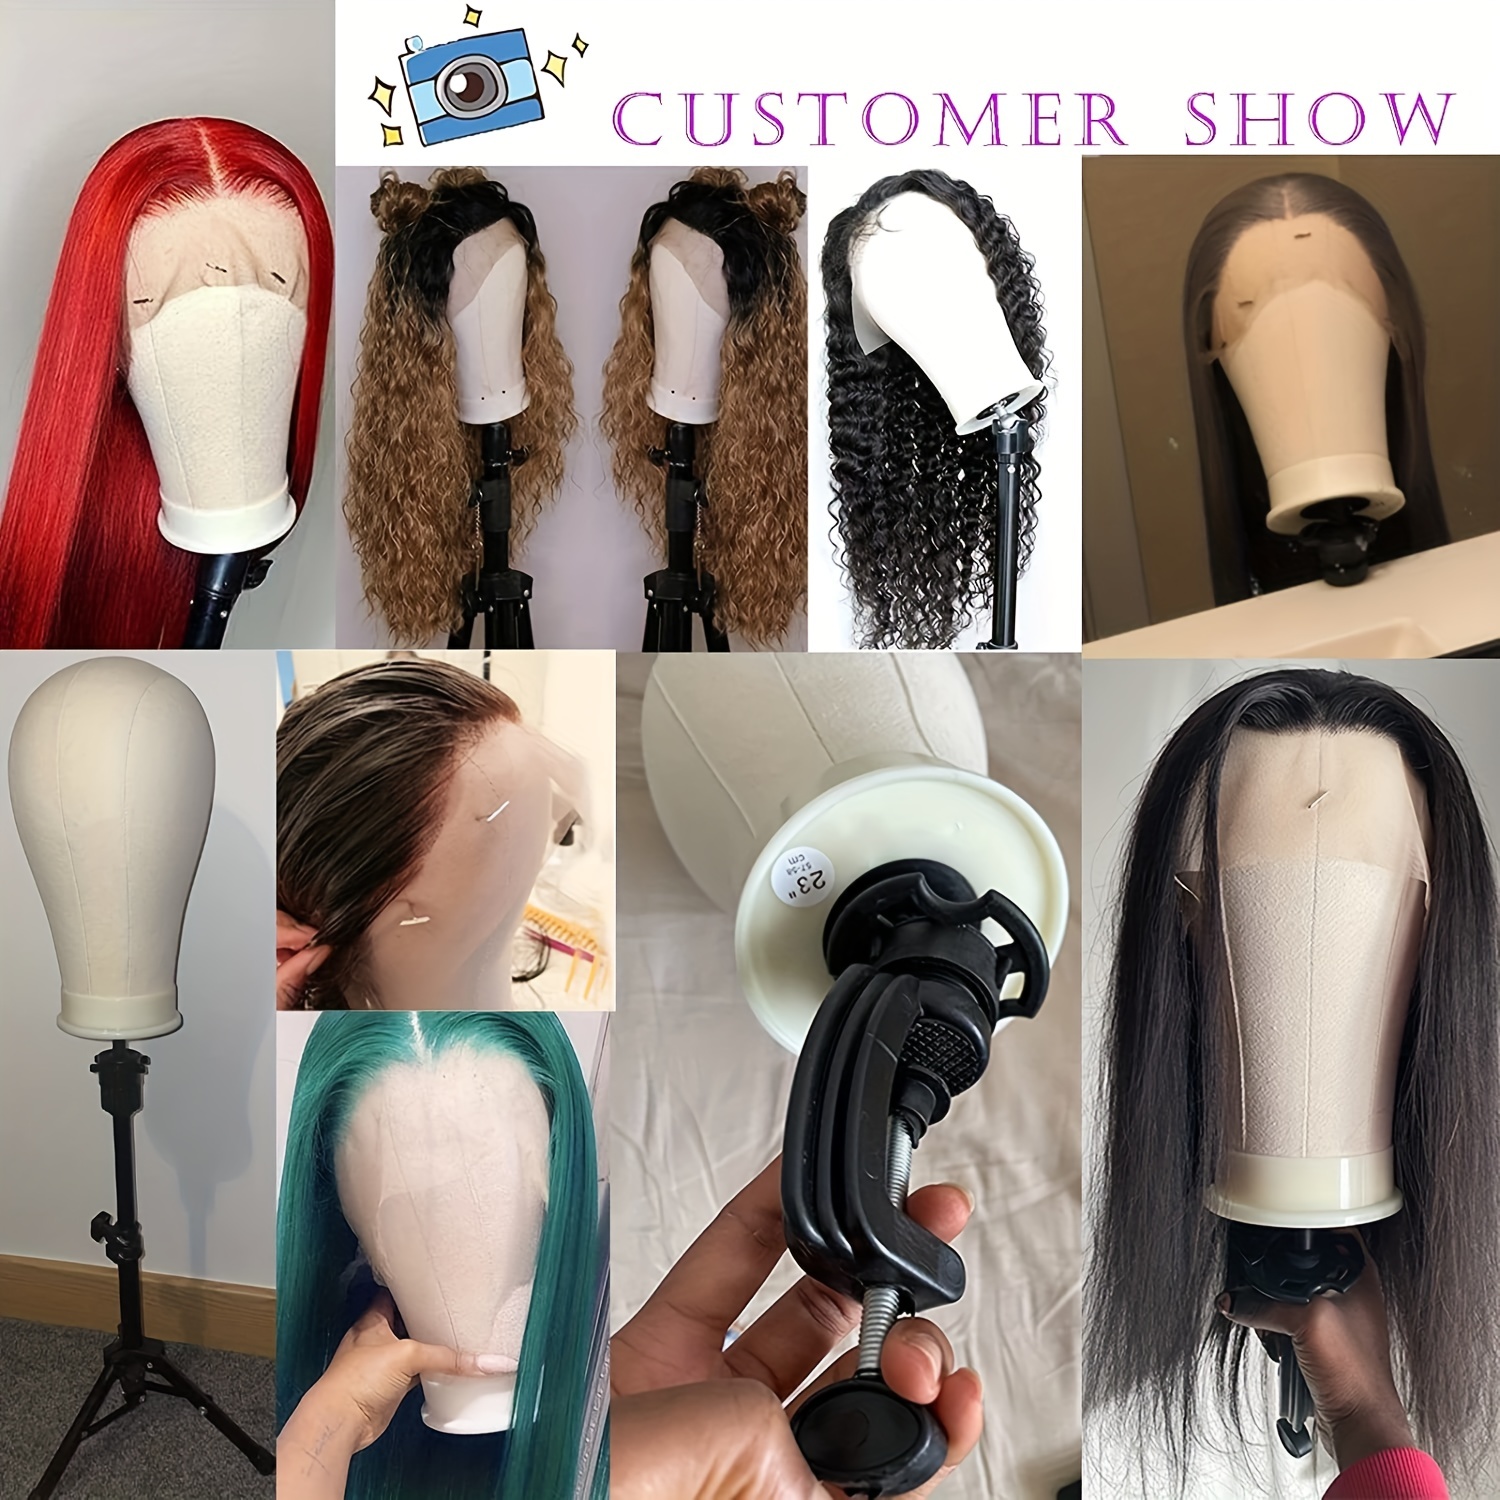 22Inch Wig Head,Wig Stand Tripod with Mannequin Head,Wig Head